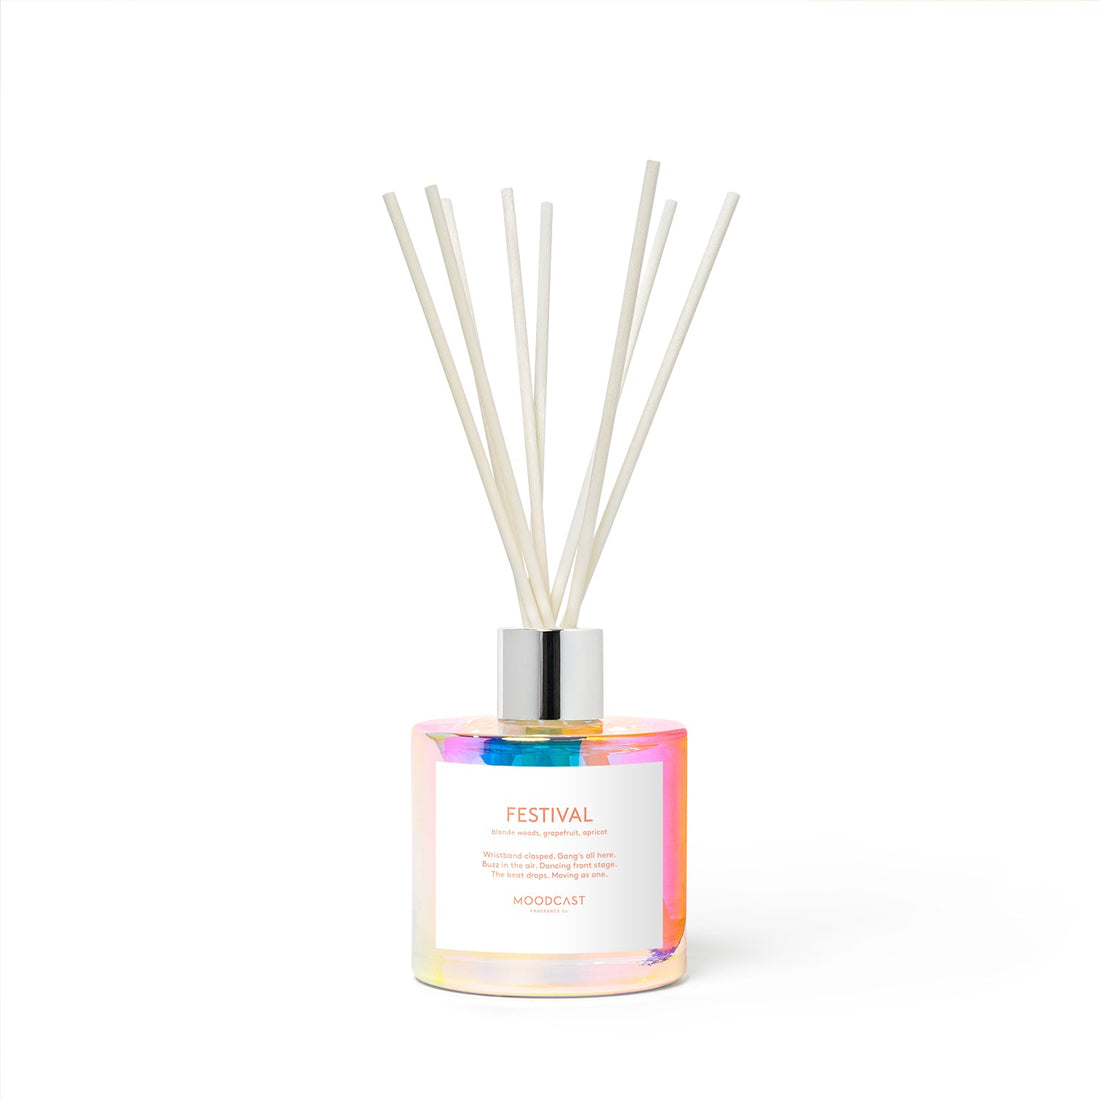 Festival - Vibes Collection (Iridescent) - 3.4fl oz/100ml Glass Reed Diffuser - Key Notes: Blonde Woods, Grapefruit, Apricot